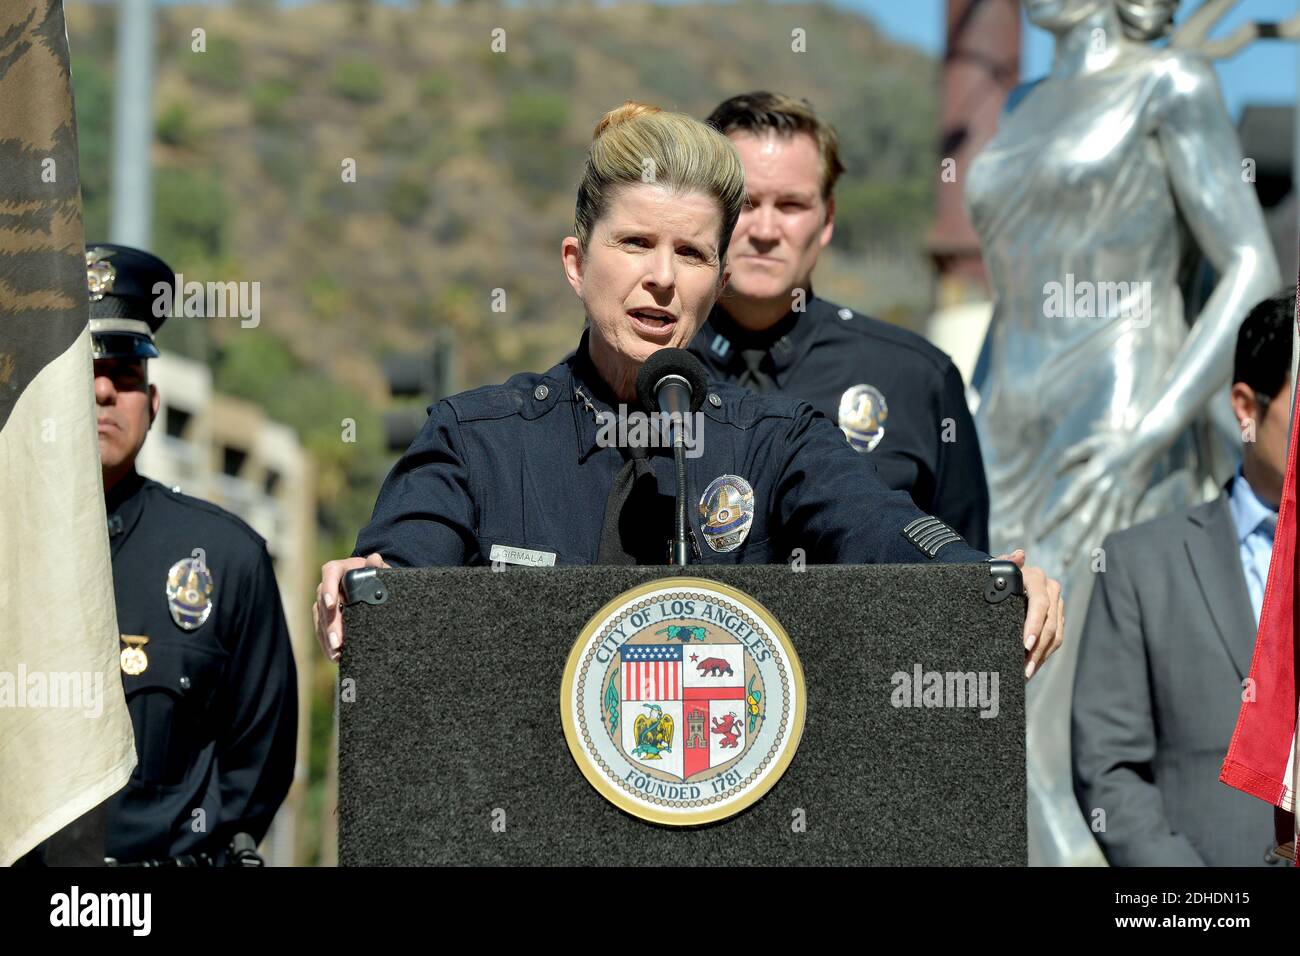 LAPD assistant Chief Beatrice Girmala attends the unveiling ceremony of the LAPD Hollywood star honring the Los Angeles Police Department Hollywood Division fallen police officers. The fallen officers are: Policeman Clyde Pritchett (1936), Policeman Clay N. Hunt (1955), Policeman Ian J. Campbell (1963), Police Officer Robert J. Cote (1969), Detective Russell L. Kuster (1990), Police Officer Joe Rios (1993), Police Officer Charles D. Heim (1994) and Police Officer Nicholas Lee (2014). October 23, 2017 in Los Angeles, California. Photo by Lionel Hahn/AbacaPress.com Stock Photo